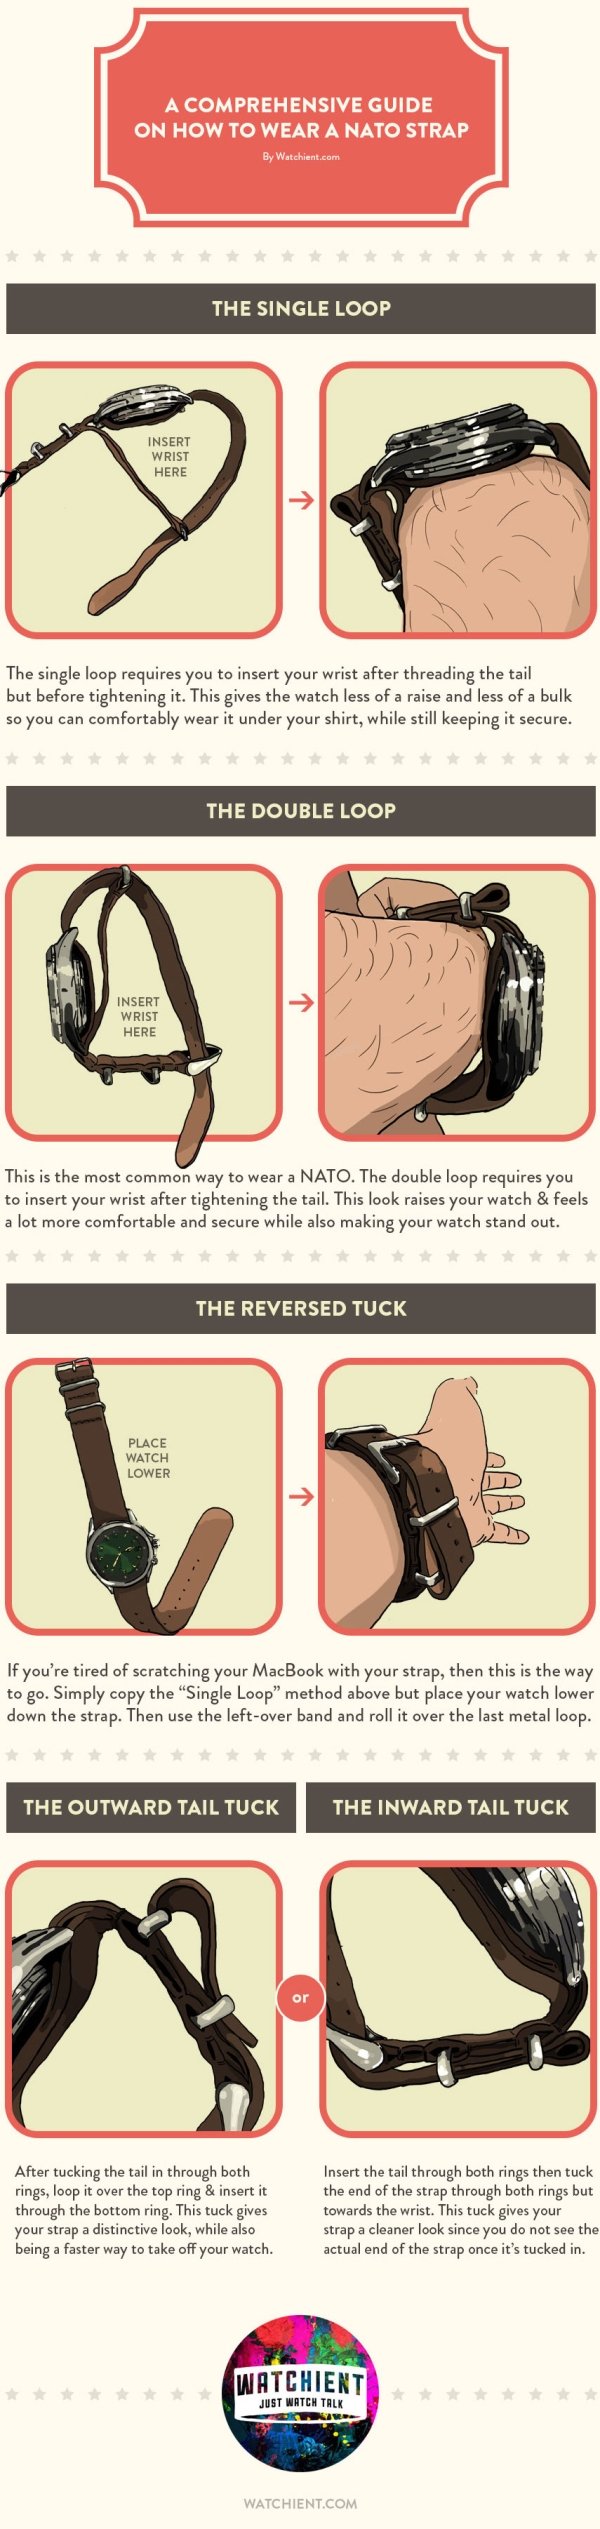 useful charts and infographics - fashion accessory - A Comprehensive Guide On How To Wear A Nato Strap By Watchient.com The Single Loop Insert Wrist Here The single loop requires you to insert your wrist after threading the tail but before tightening it. 